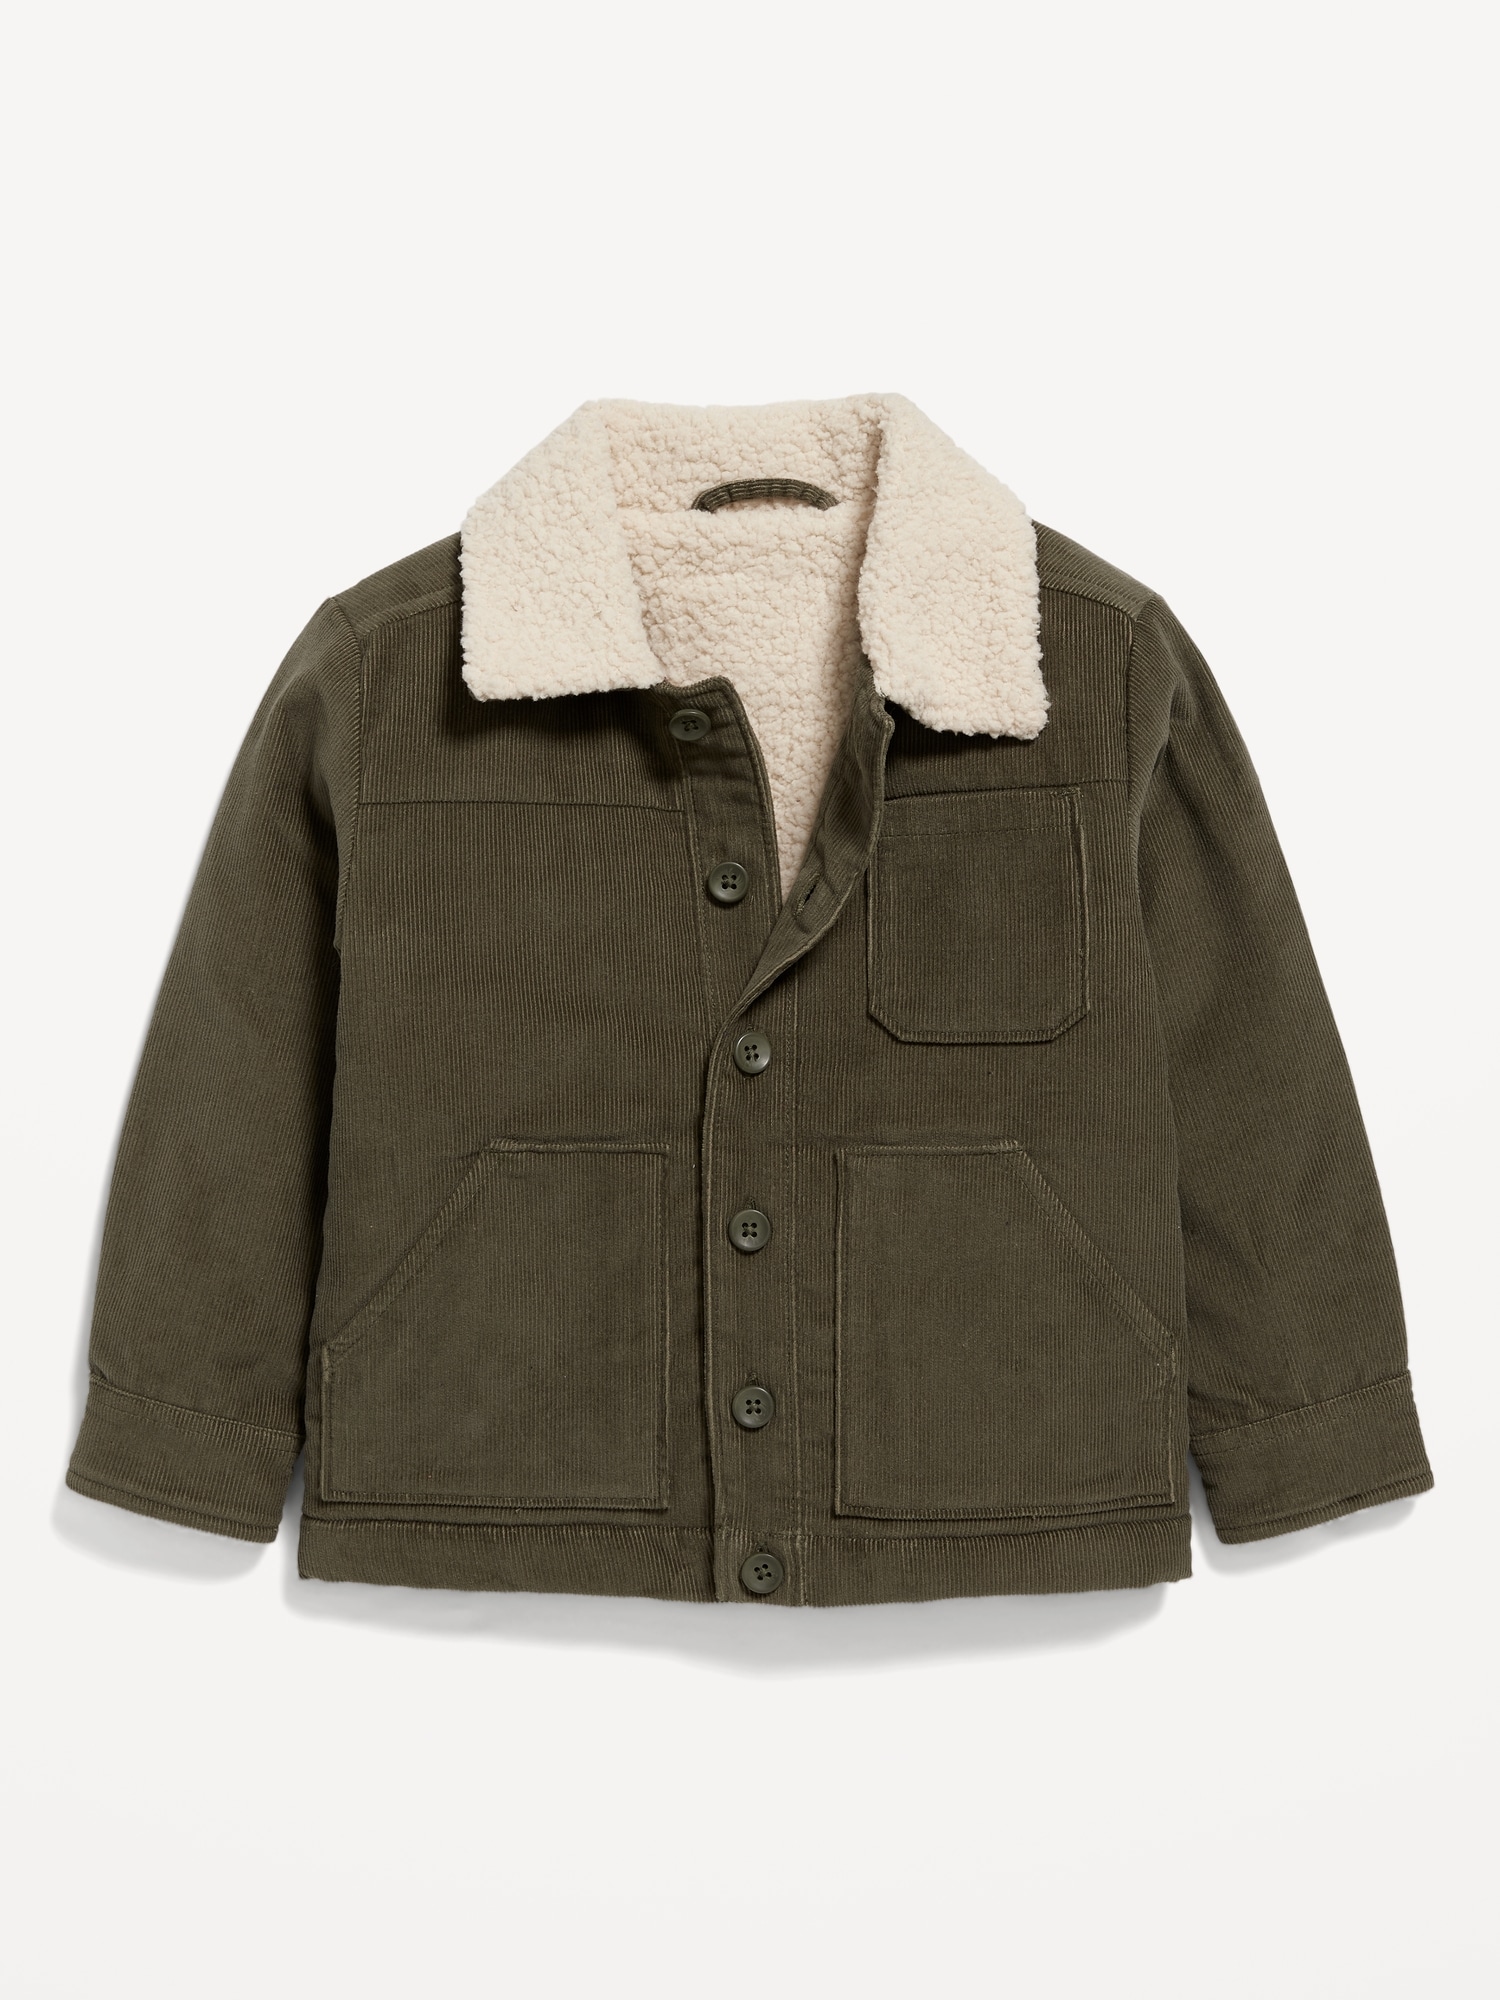 Unisex Sherpa-Lined Corduroy Shacket for Toddler | Old Navy